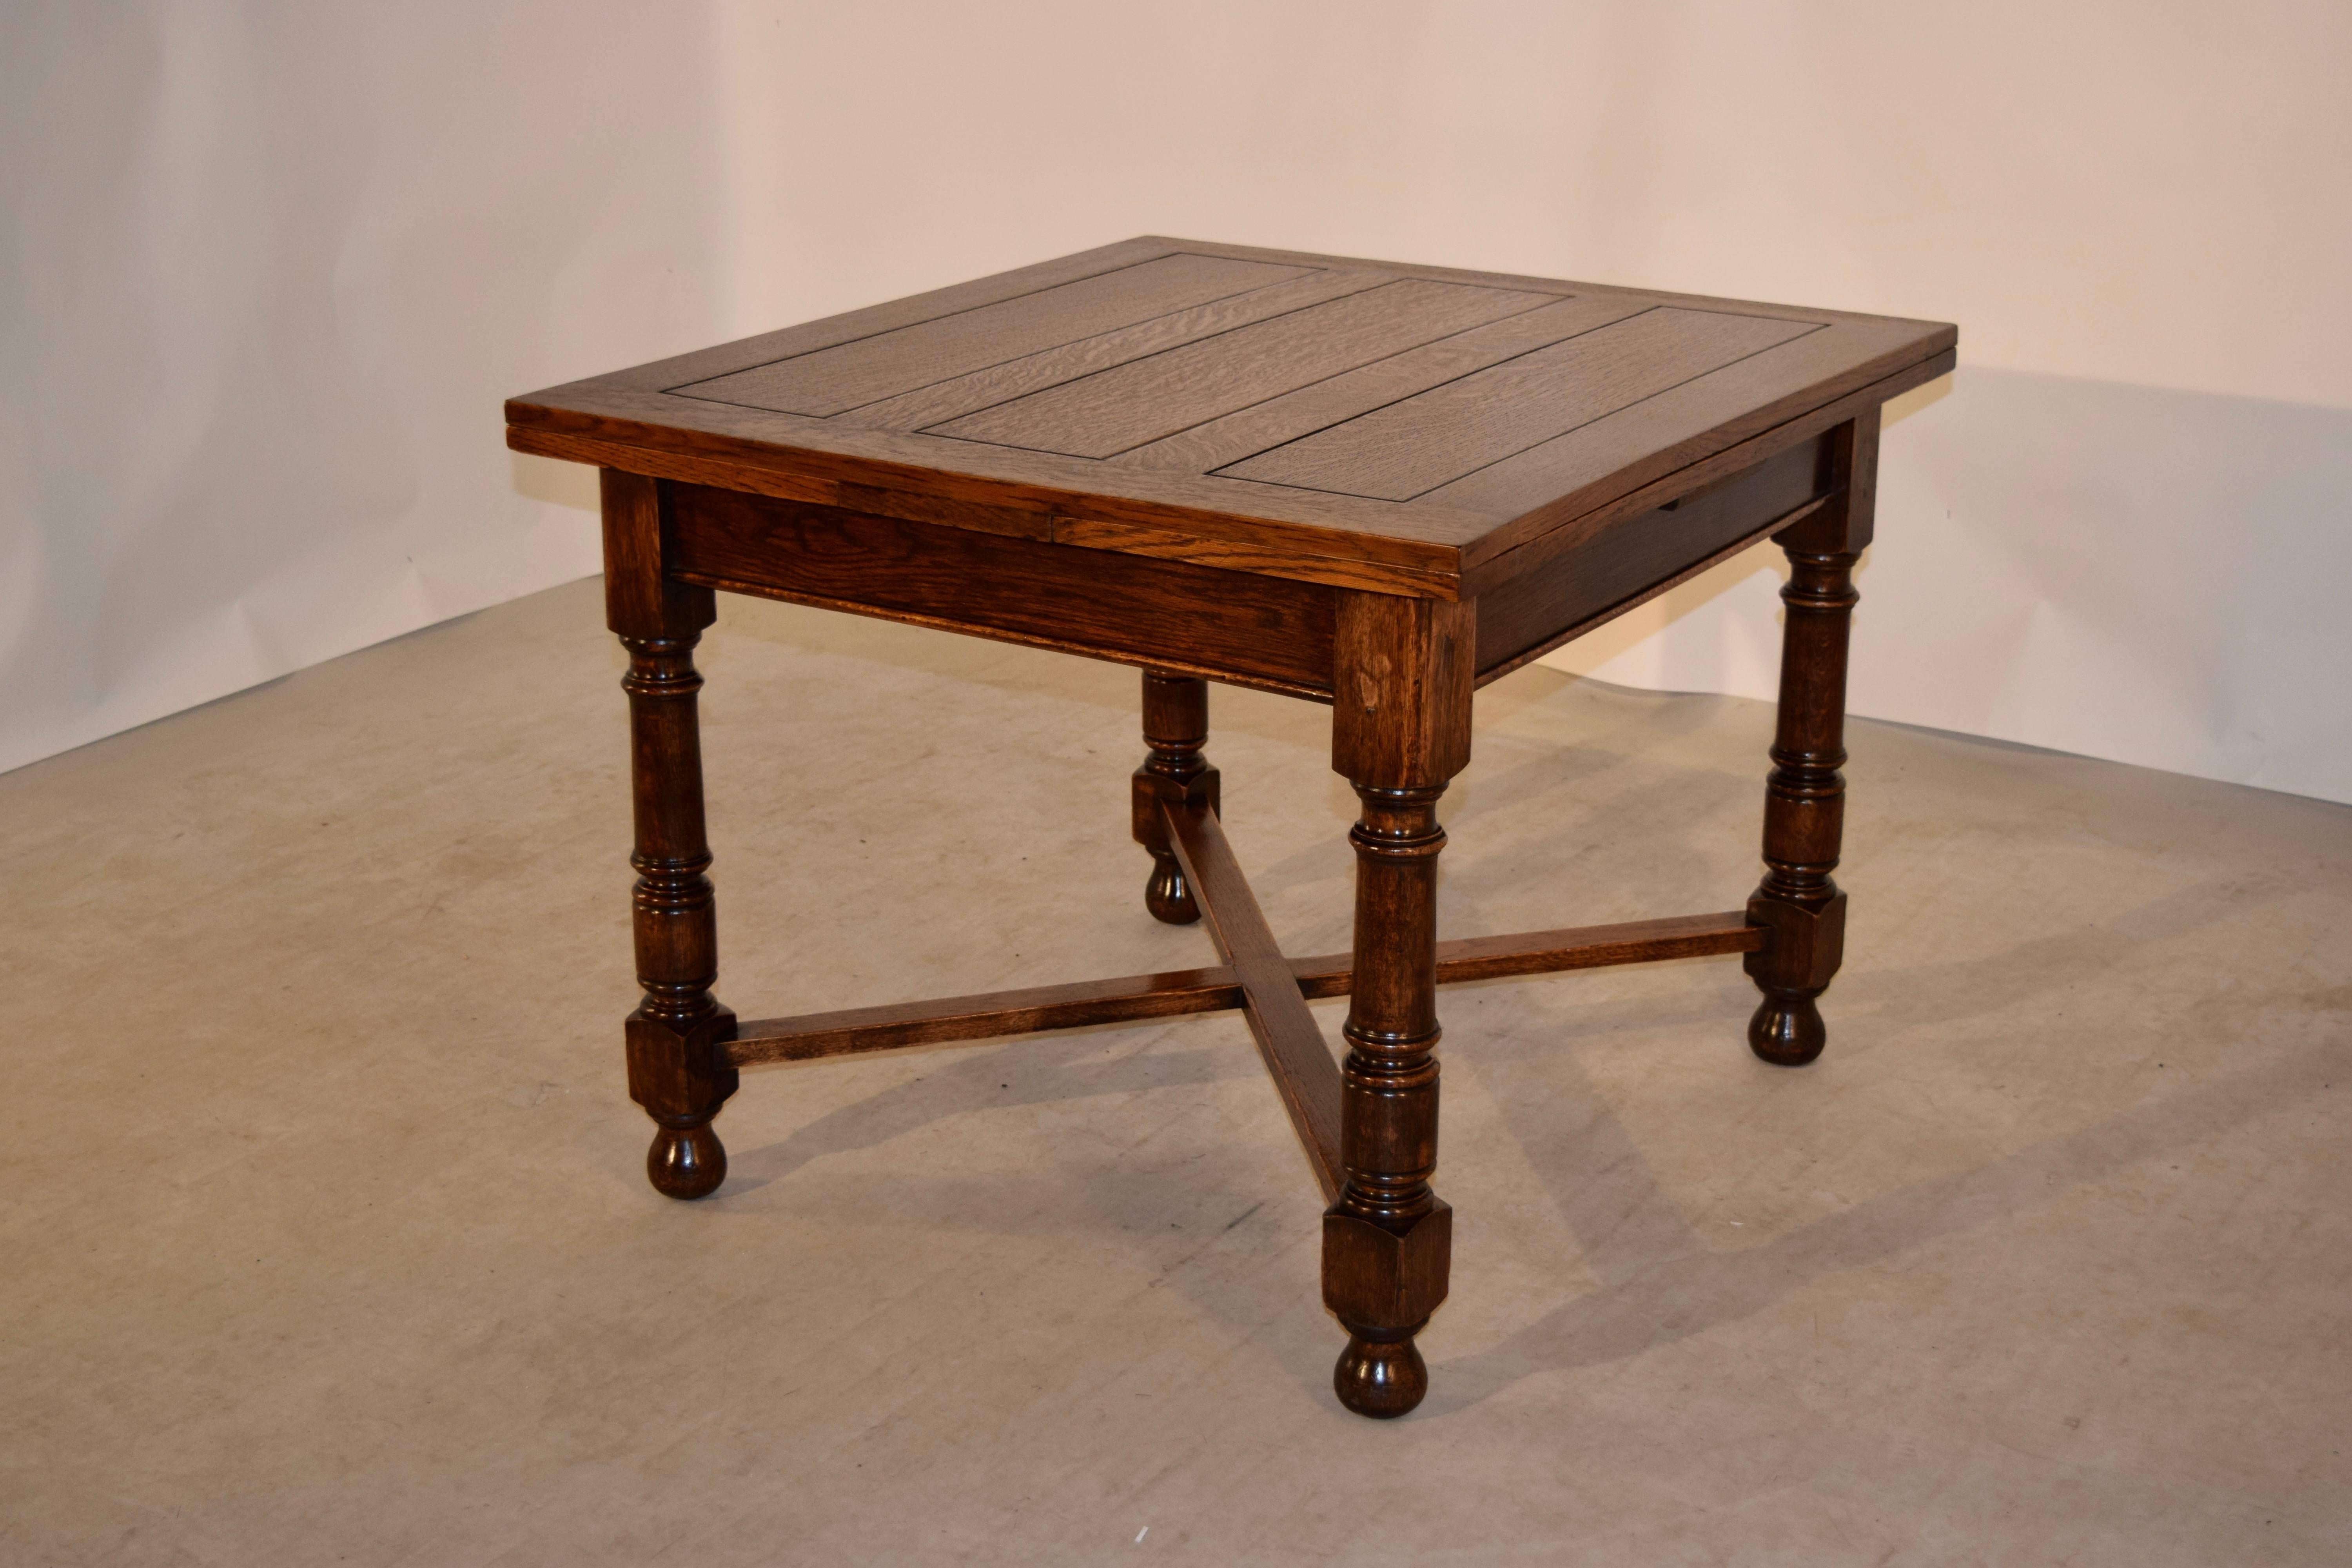 English oak draw leaf table, circa 1900 with a panelled top and leaves, following down to a simple apron and gun barrel hand turned legs, joined by cross stretchers and ending in hand turned feet. The top open measures 63.75 x 38.63.